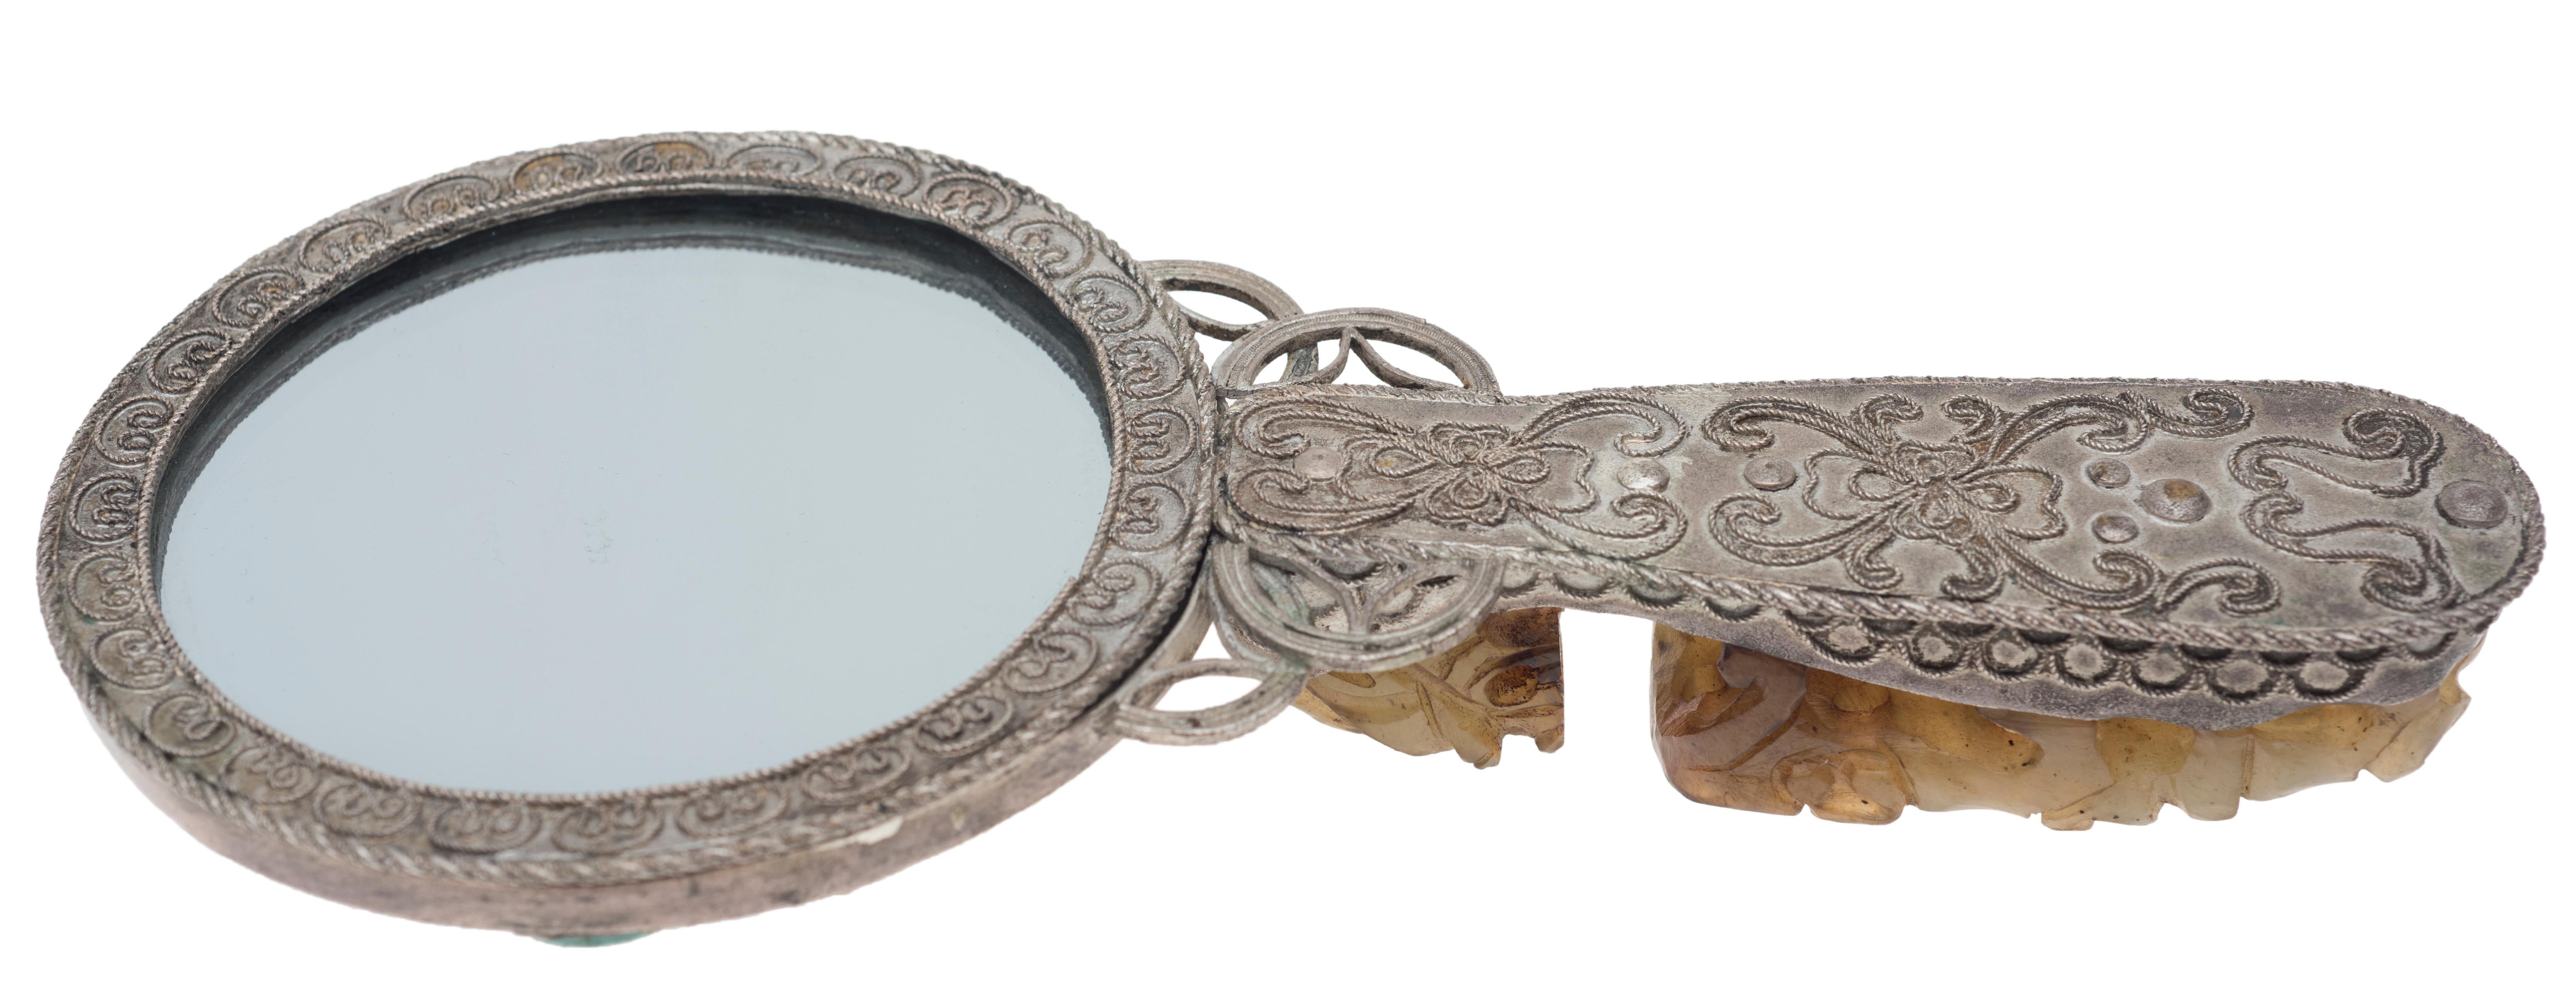 Vintage decorated silver toilet mirror with inclusions in jade shaped as dragons. China, beginnings of 20th century.

This object is shipped from Italy. Under existing legislation, any object in Italy created over 70 years ago by an artist who has